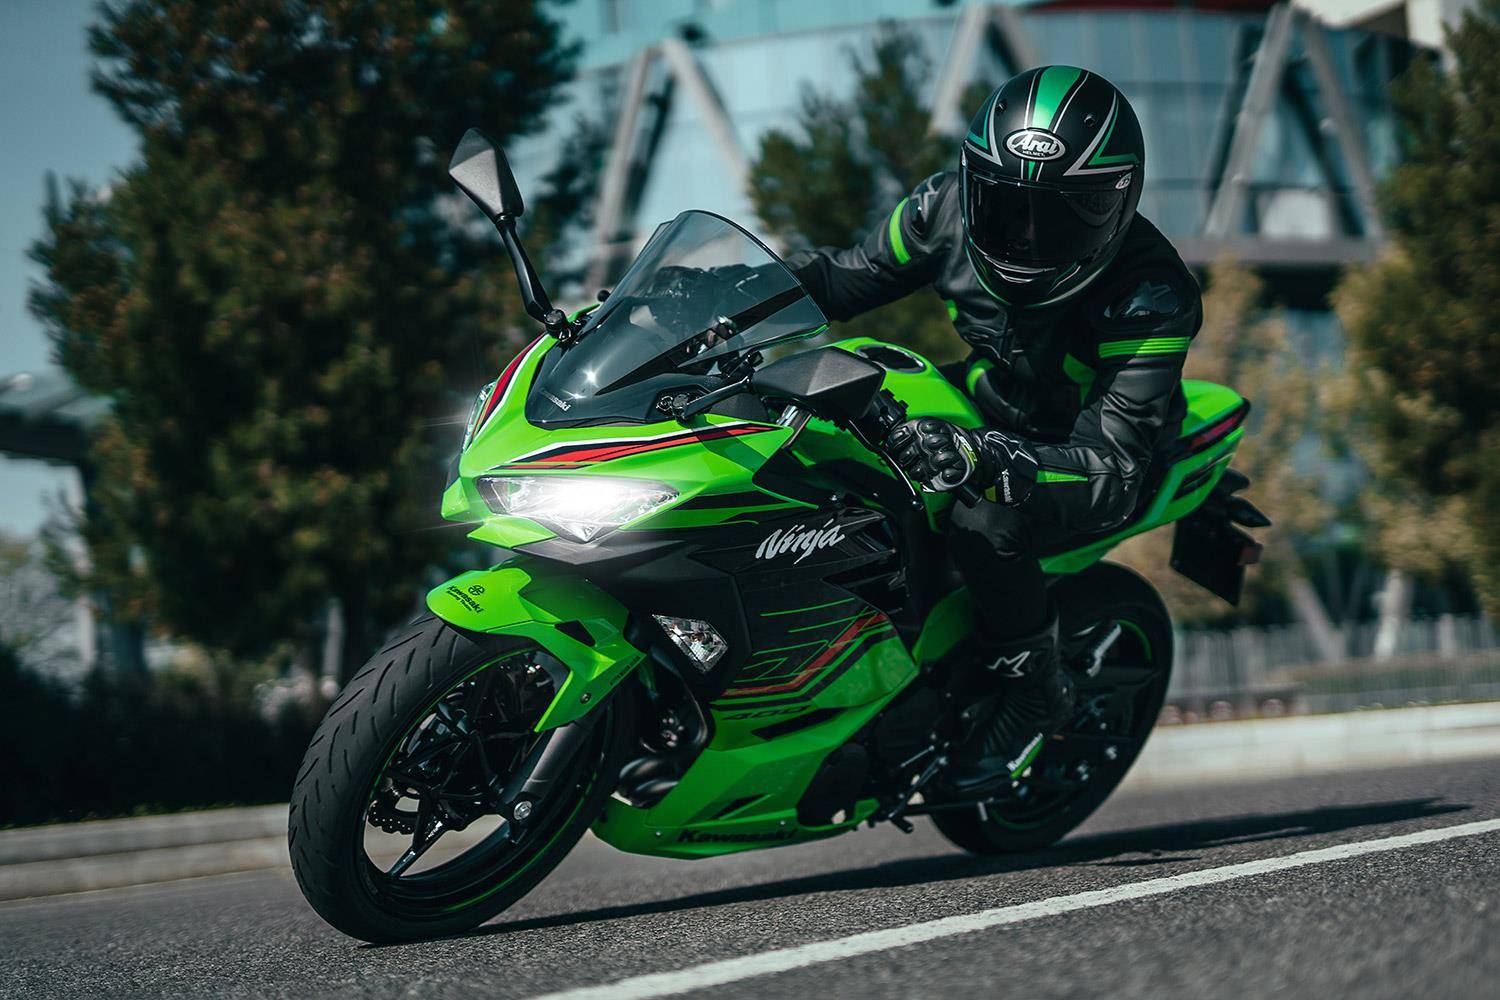 Kawasaki Ninja 400 Price Specification and feature list details